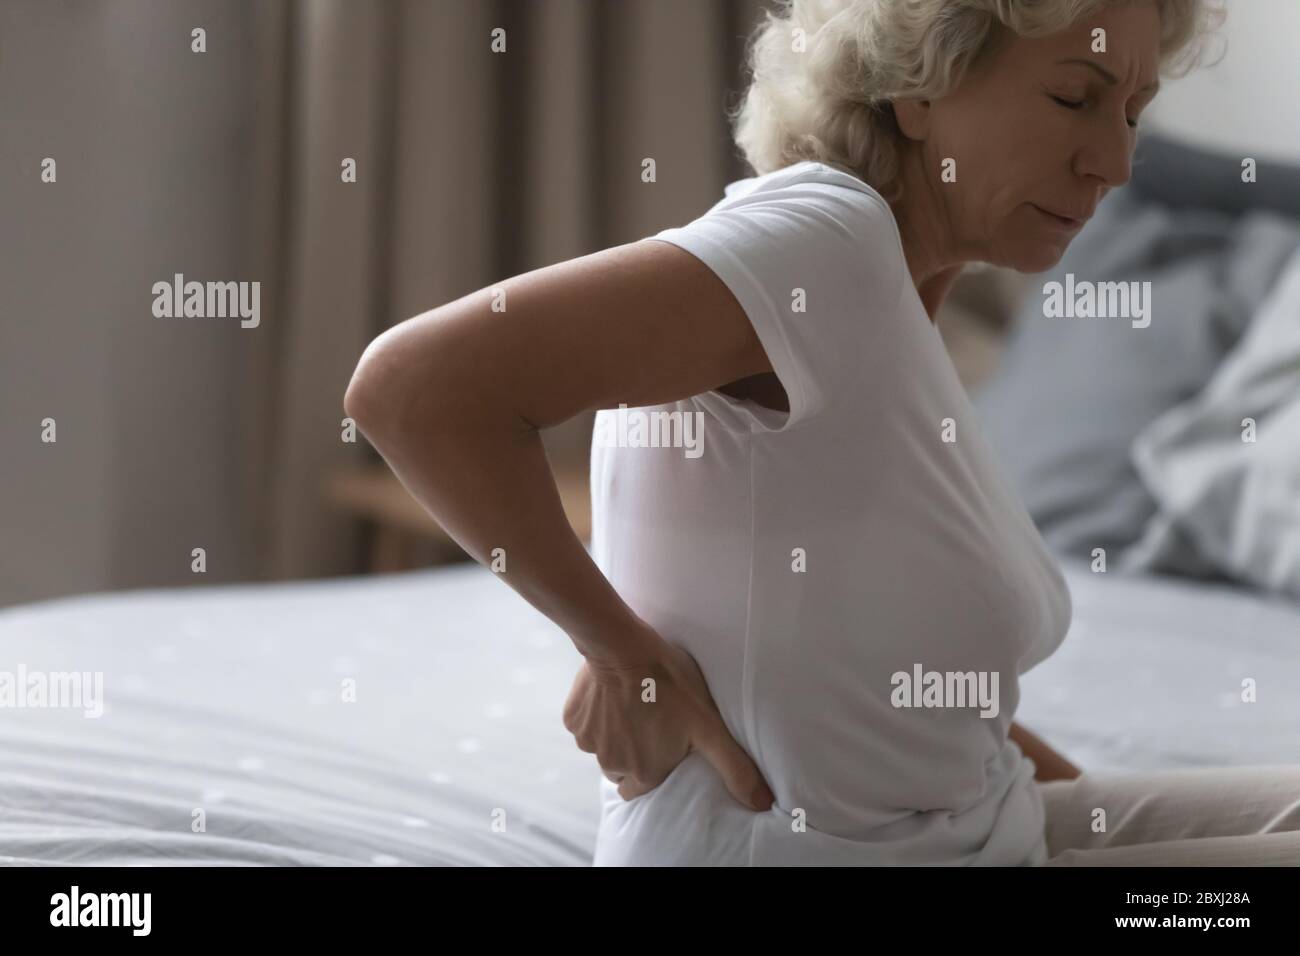 Unwell elderly woman struggle with arthritis at home Stock Photo